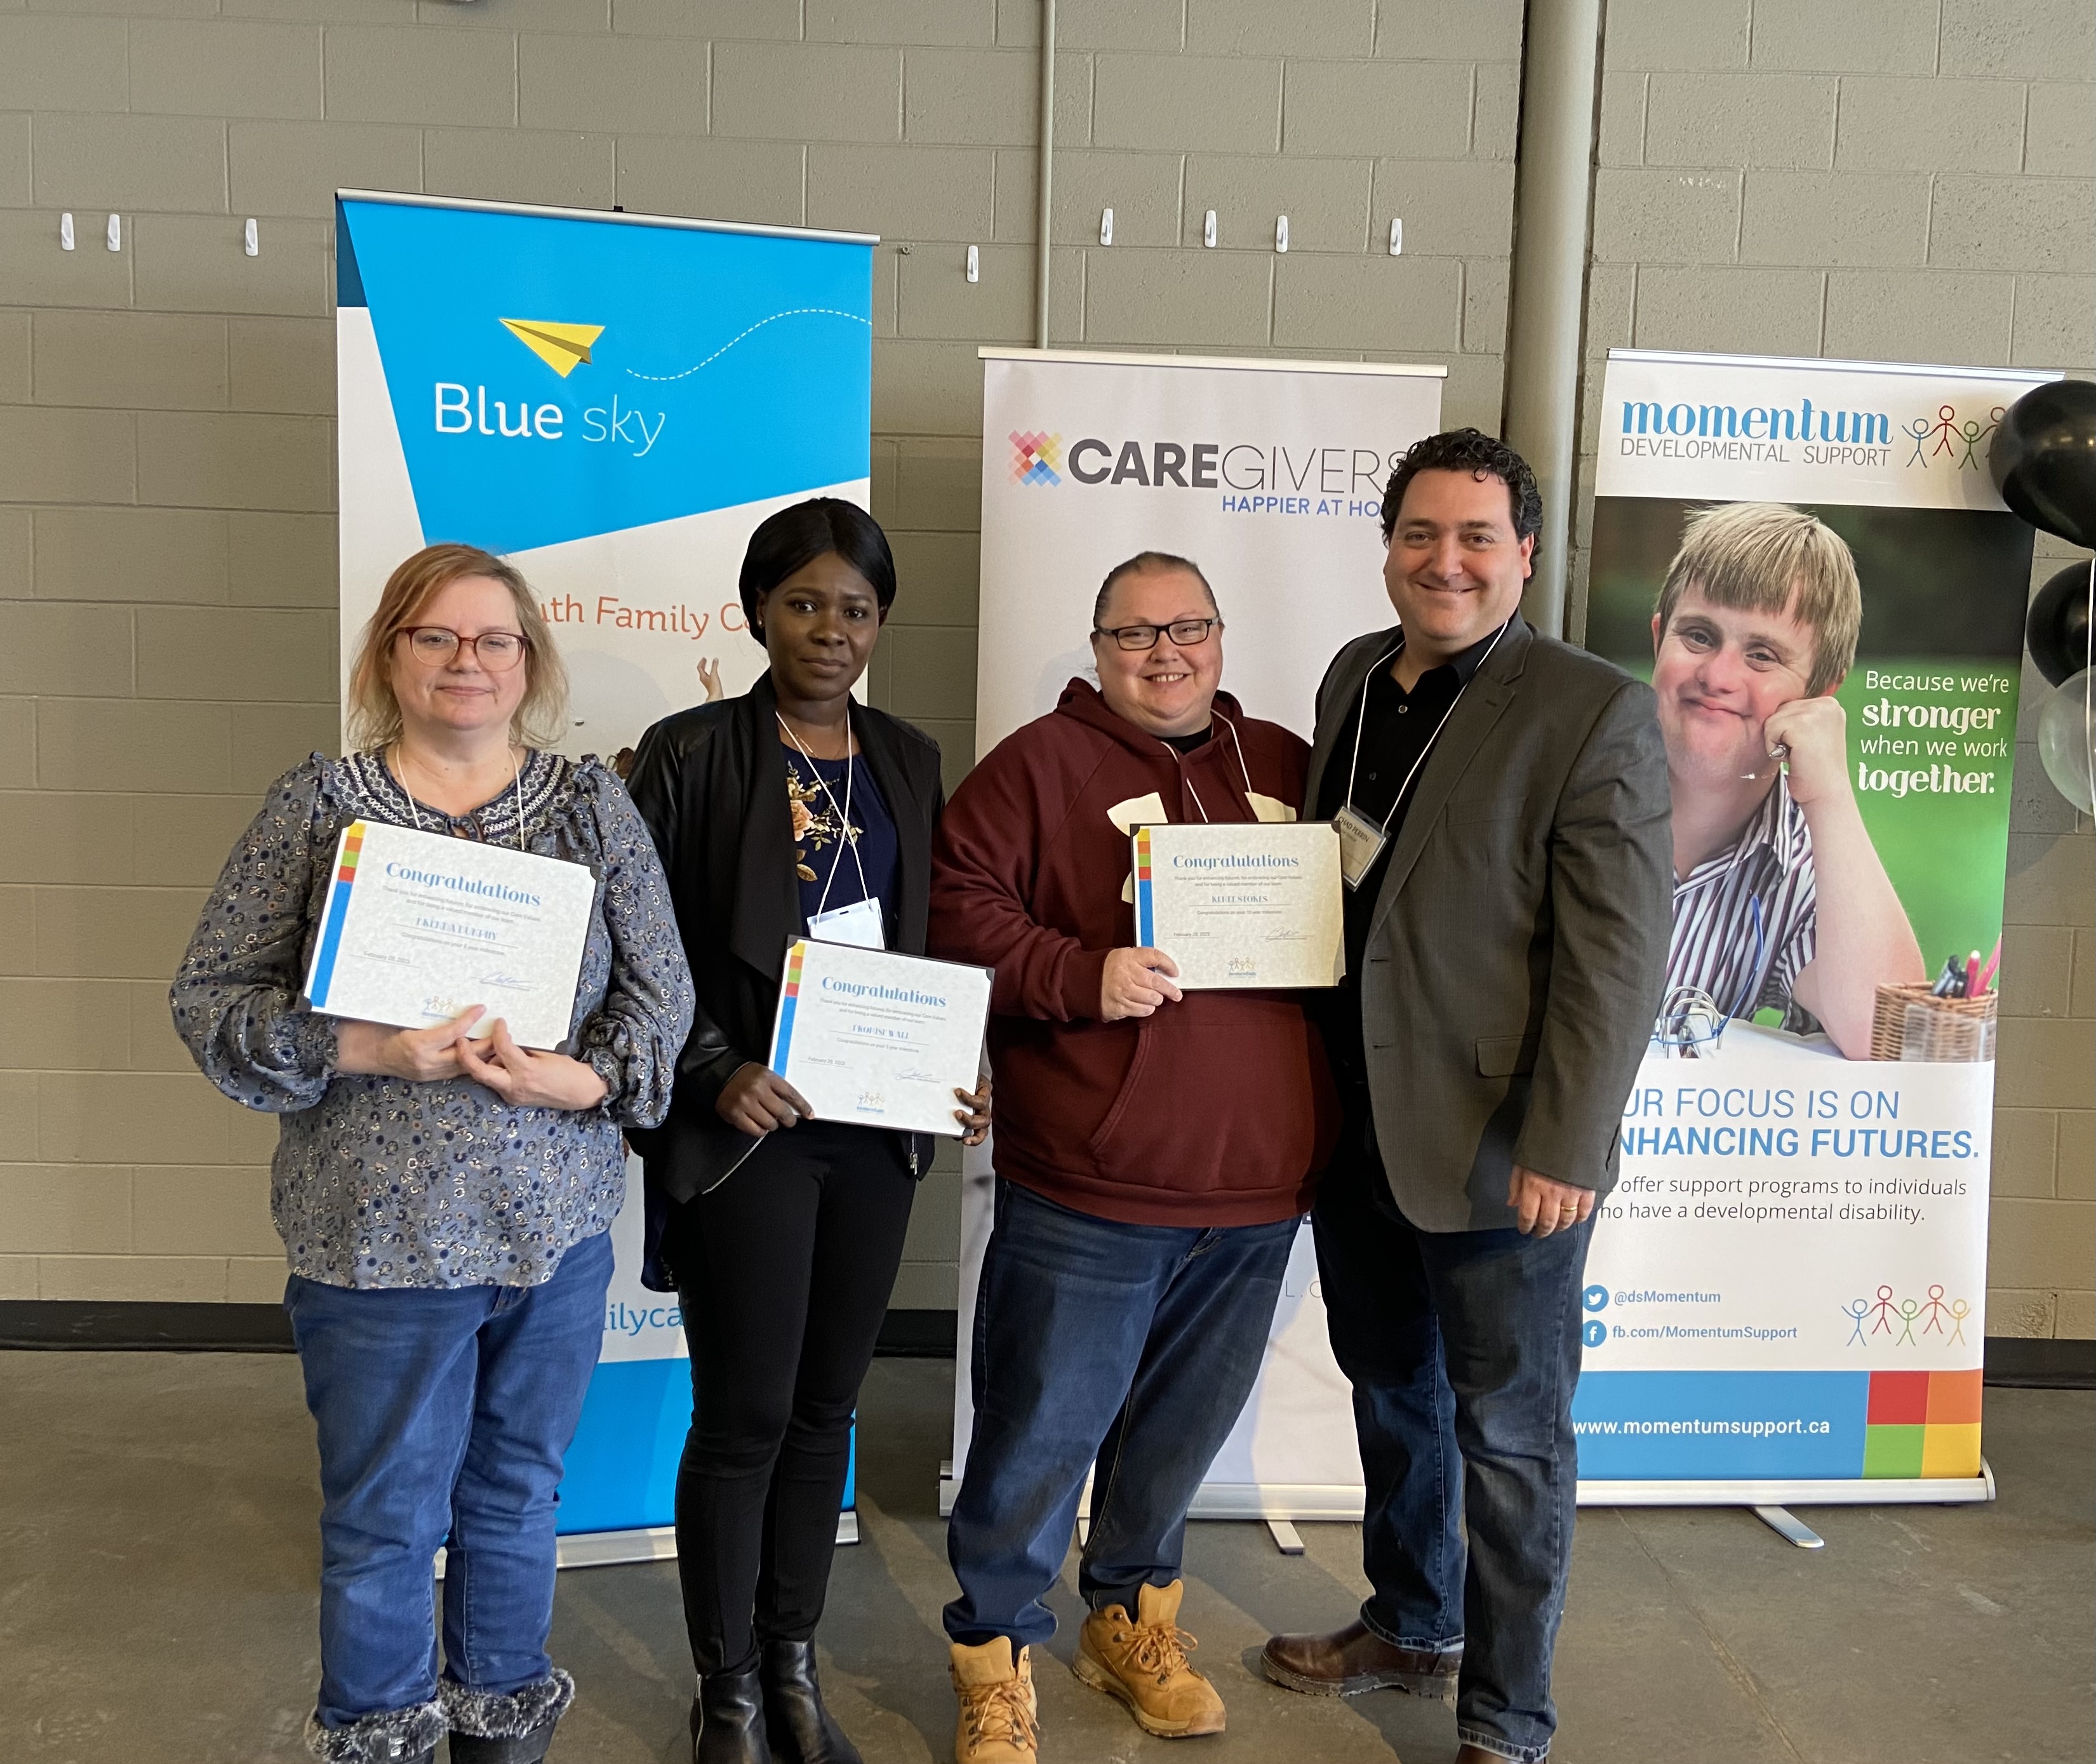 Our Executive Director, Chad standing with 3 employees who received their years of service certificates.